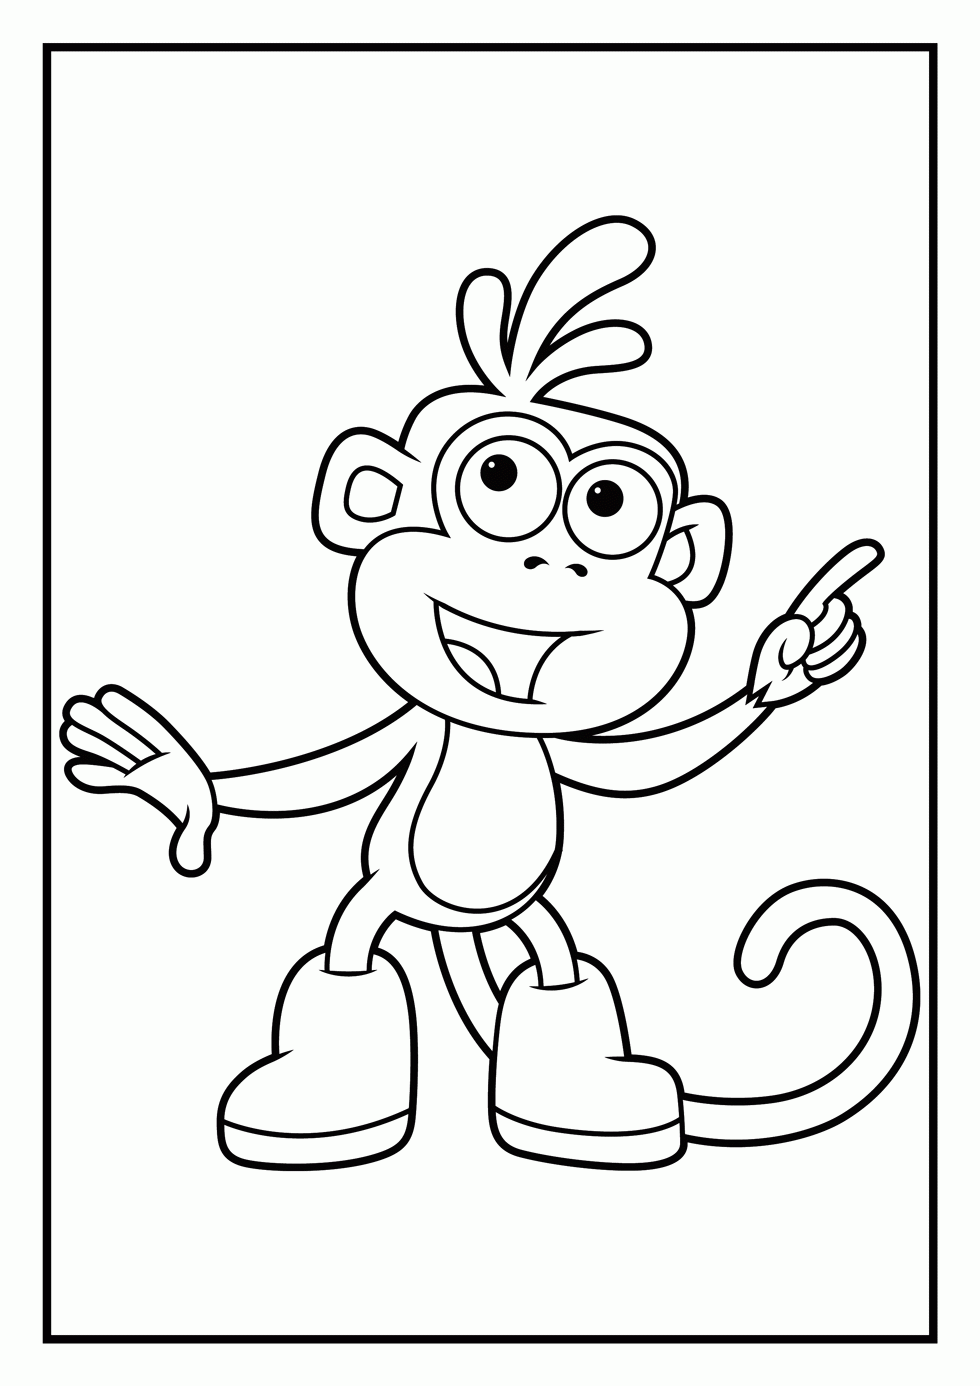 Dora and boots coloring pages to download and print for free